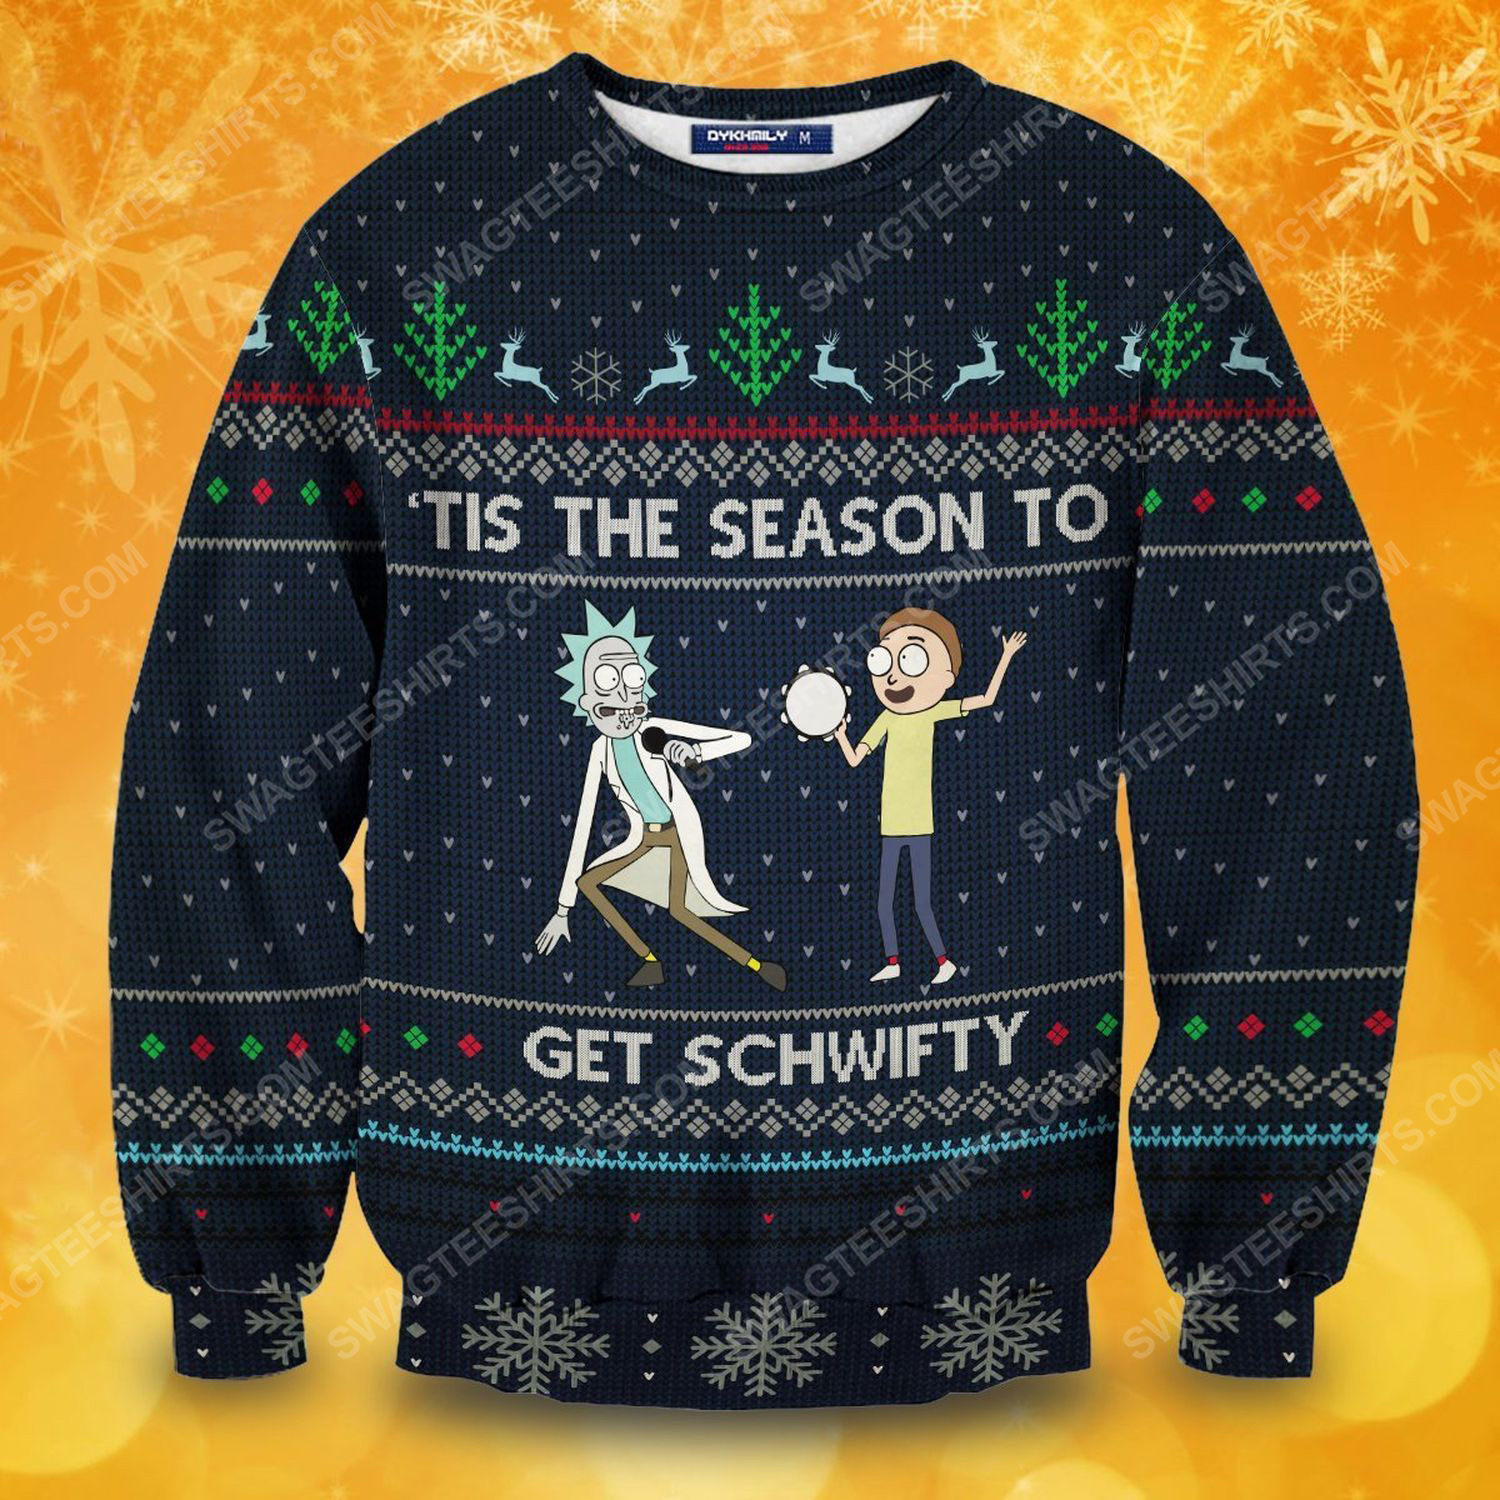 Tis the season to get schwifty rick and morty full print ugly christmas sweater 1